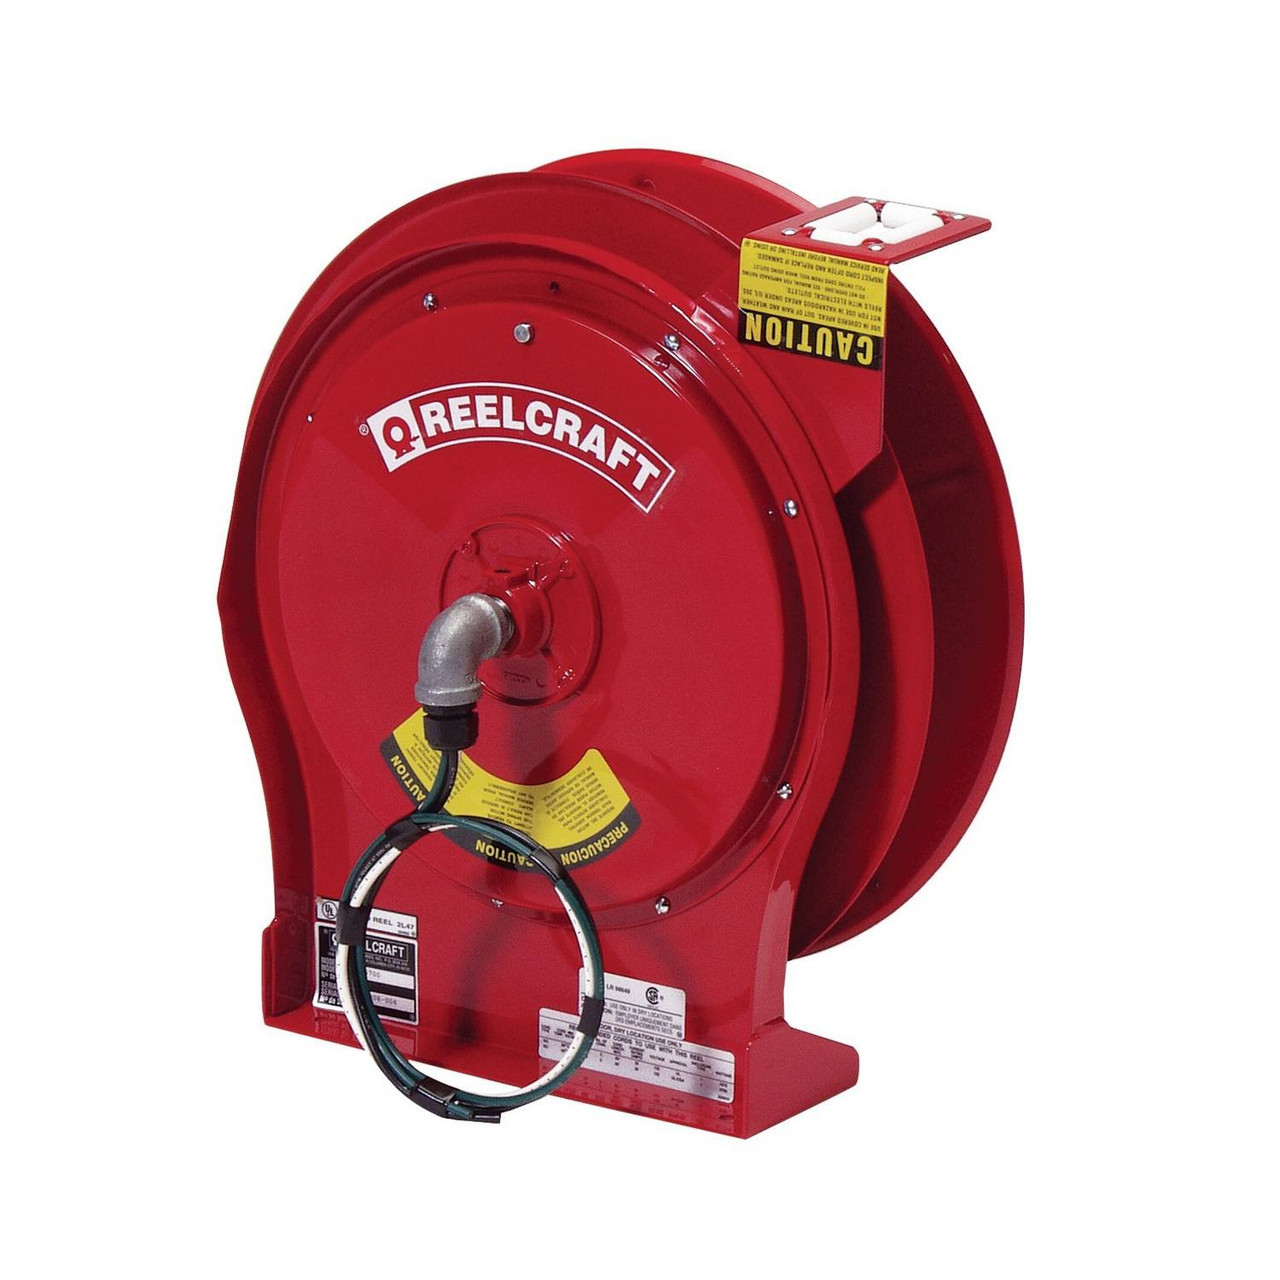 Reelcraft L 5700 Heavy Duty Power Cord Reel, 125 Volt / 30 Amp